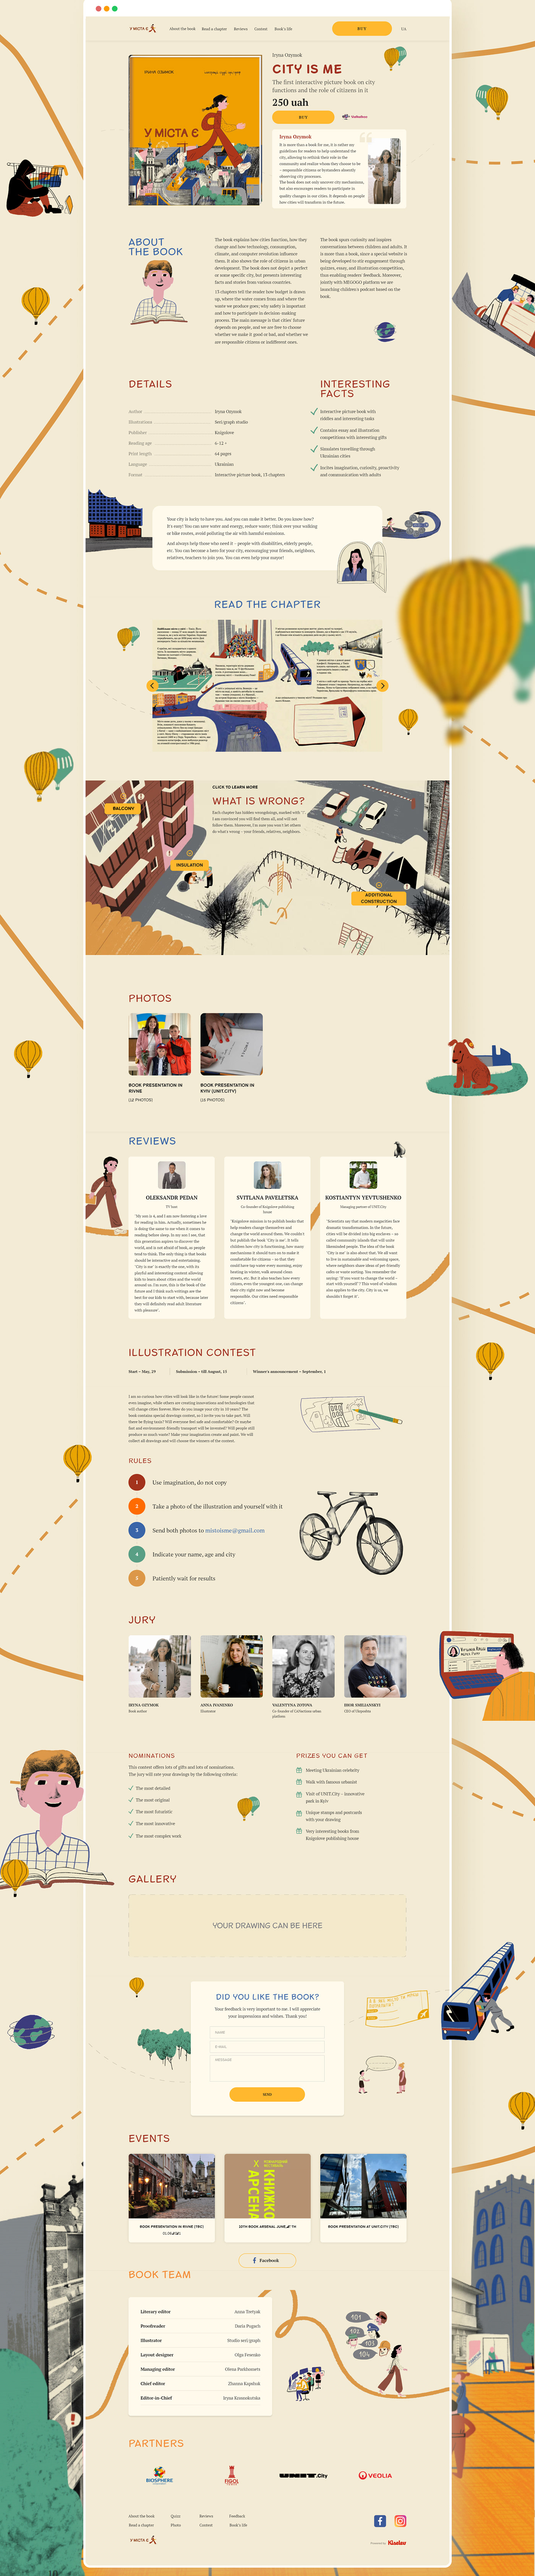 Author book books ILLUSTRATION  interaction interactive landing landing page landing page design landing pages